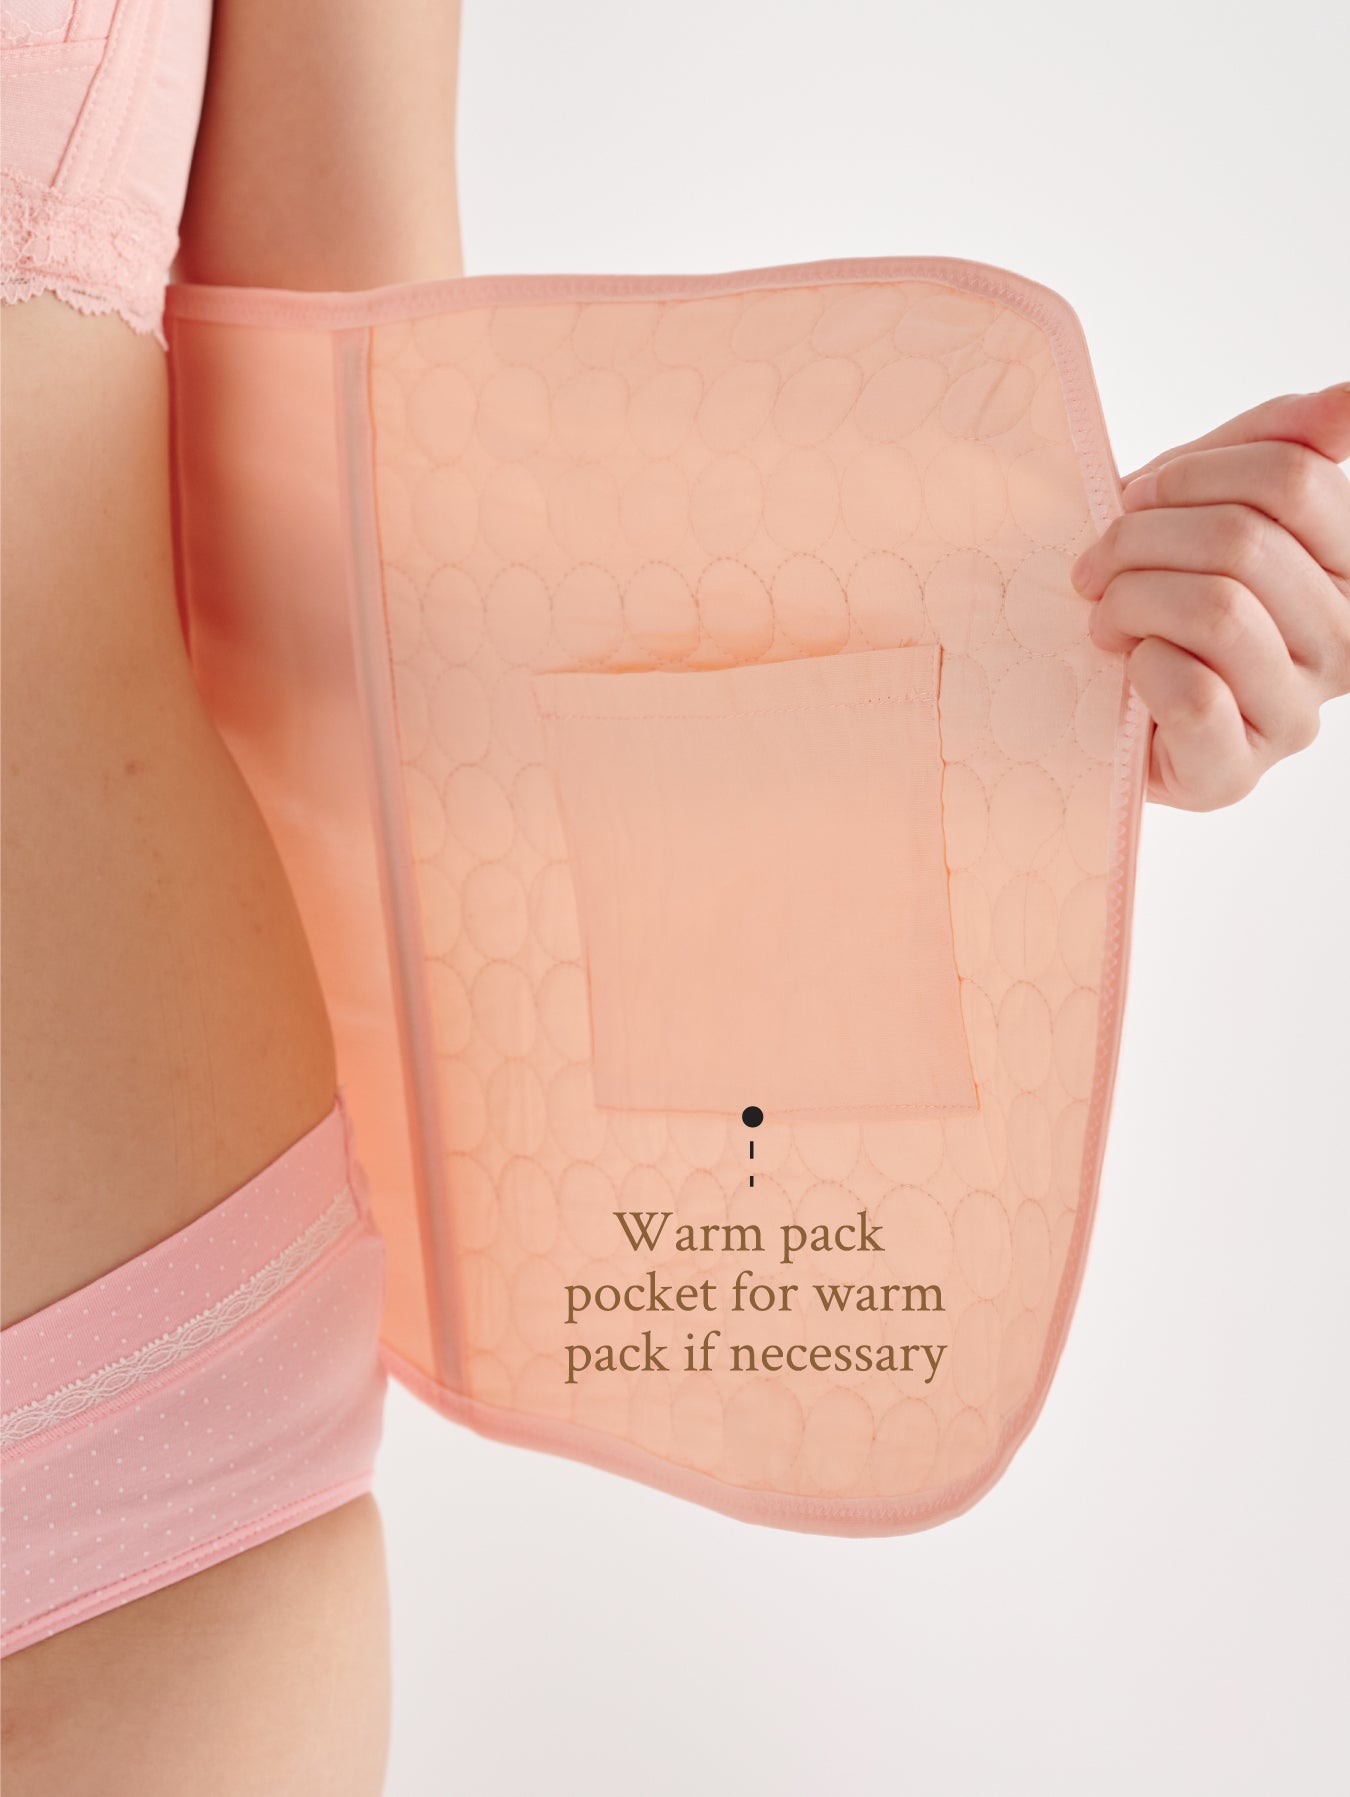 Belly and pelvic support binder for pregnancy